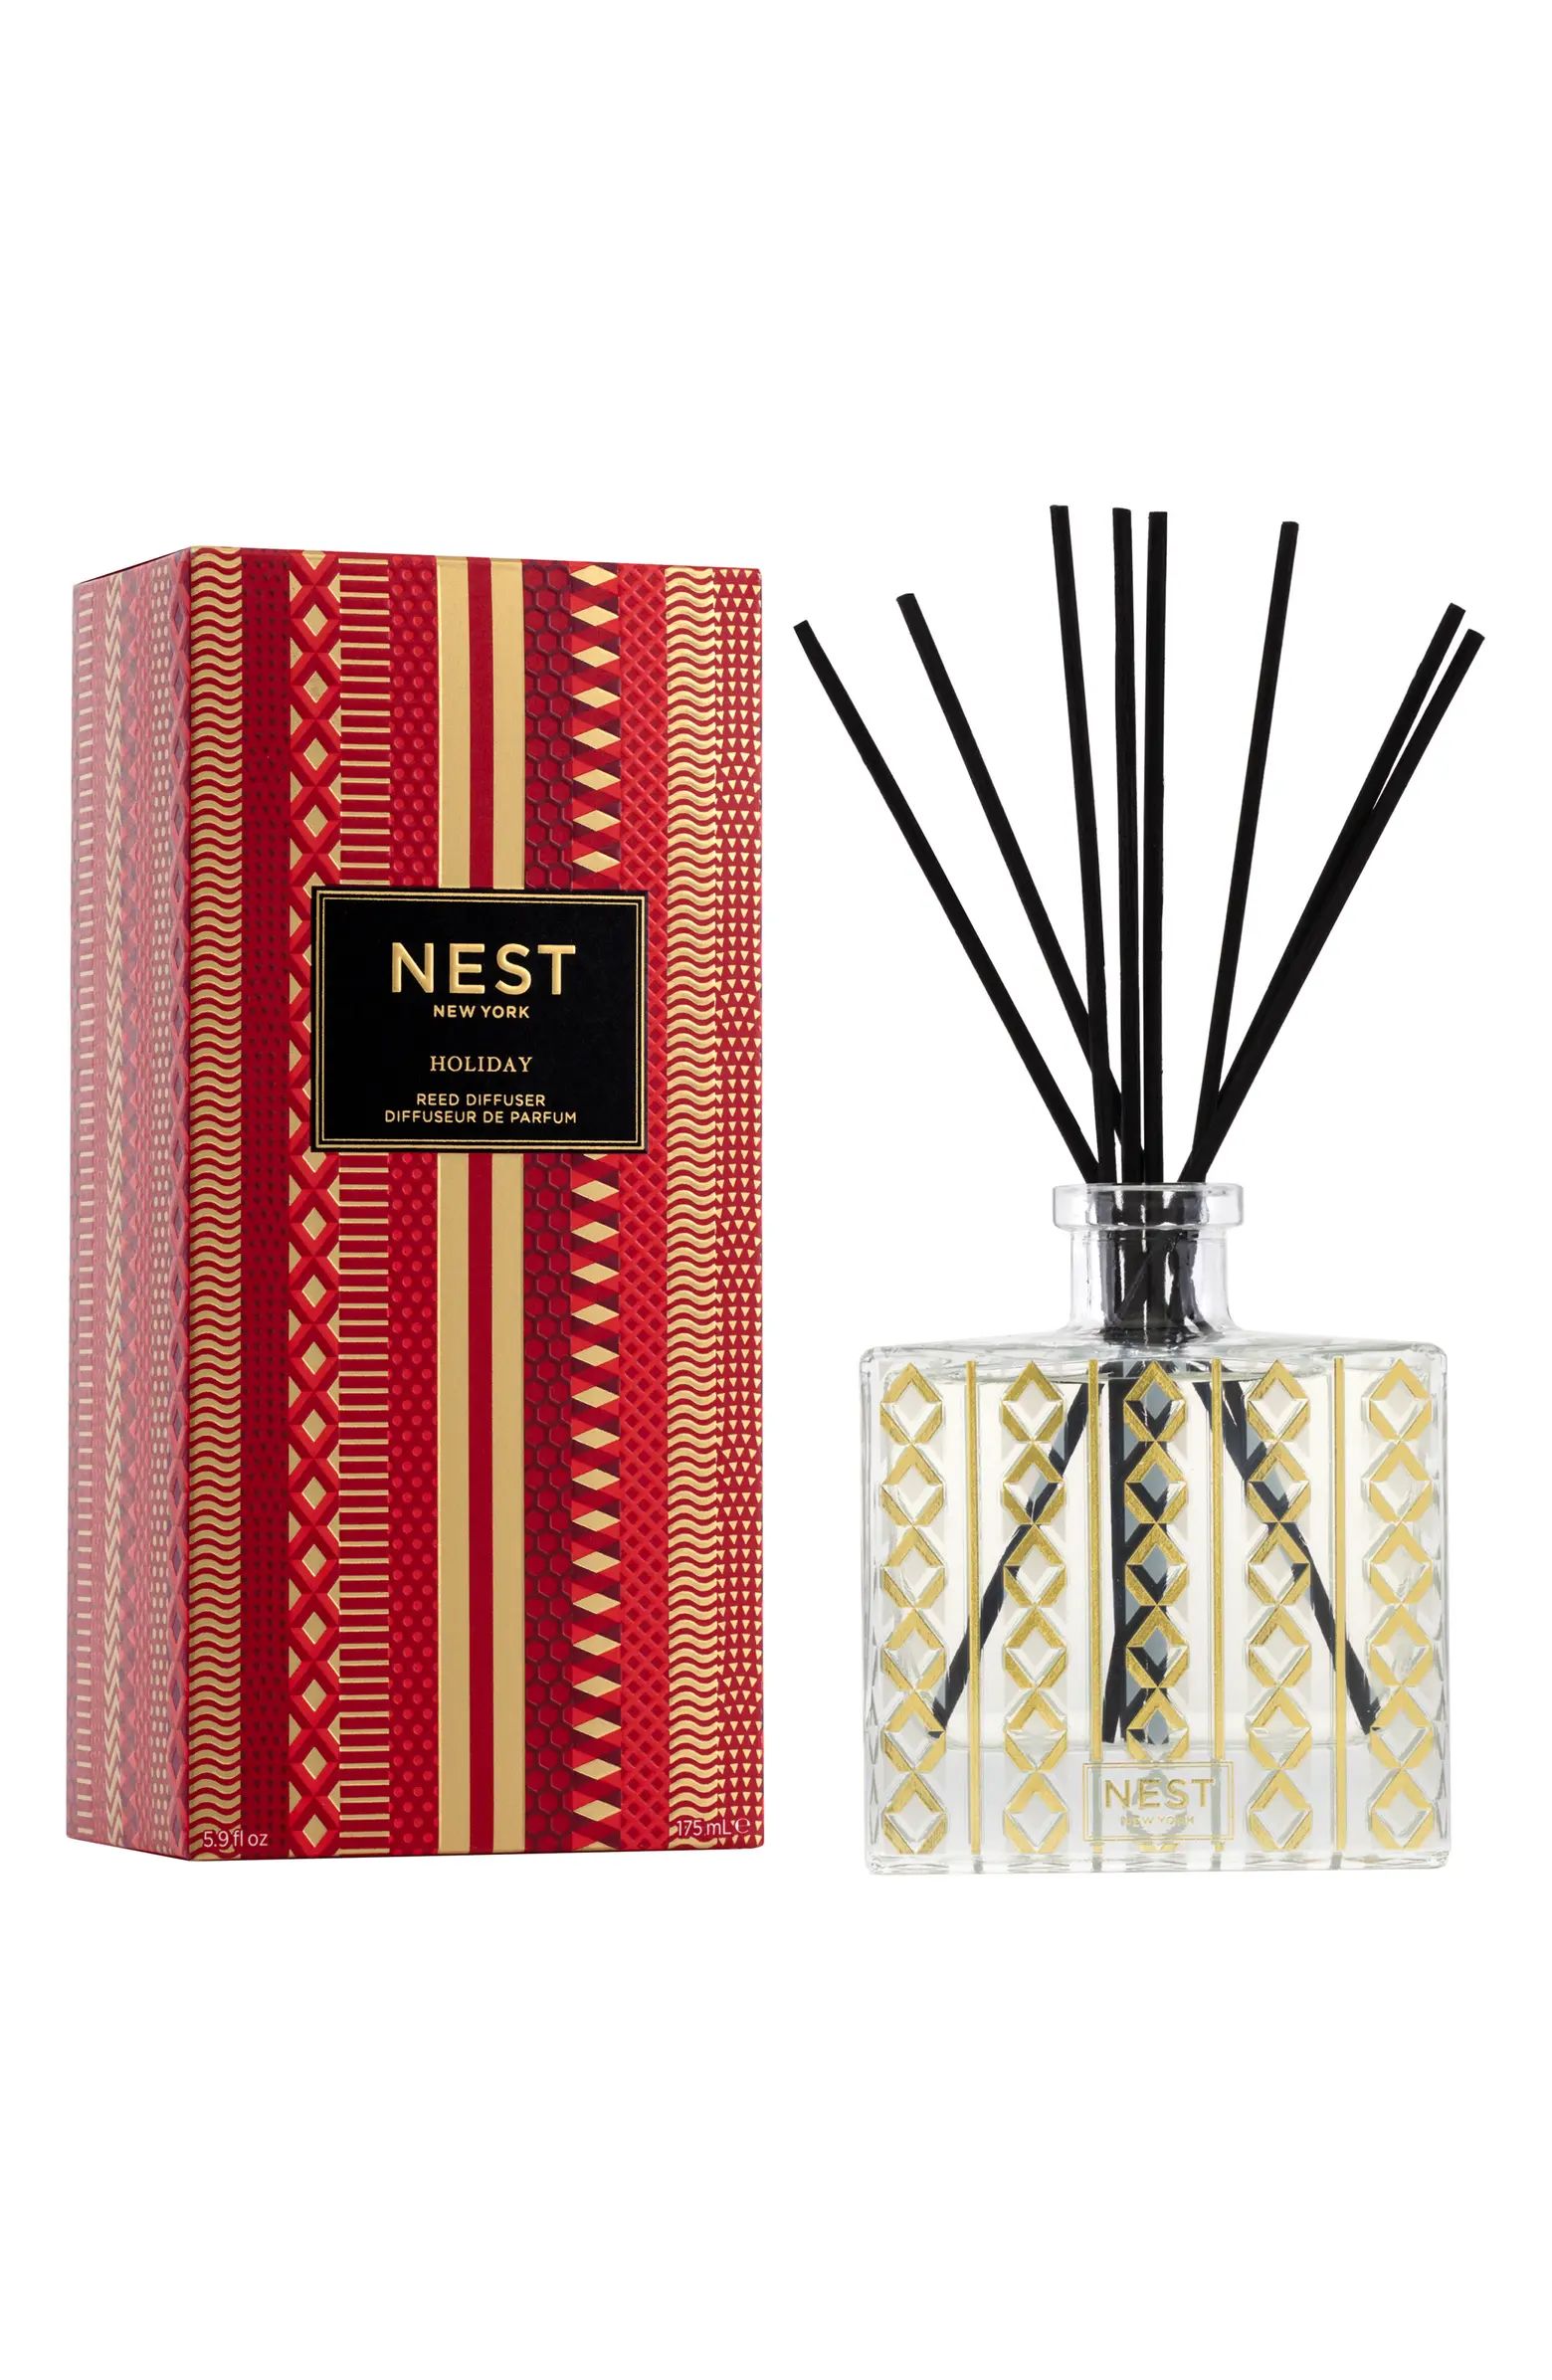 NEST New York Holiday Reed Diffuser | Nordstrom | Nordstrom